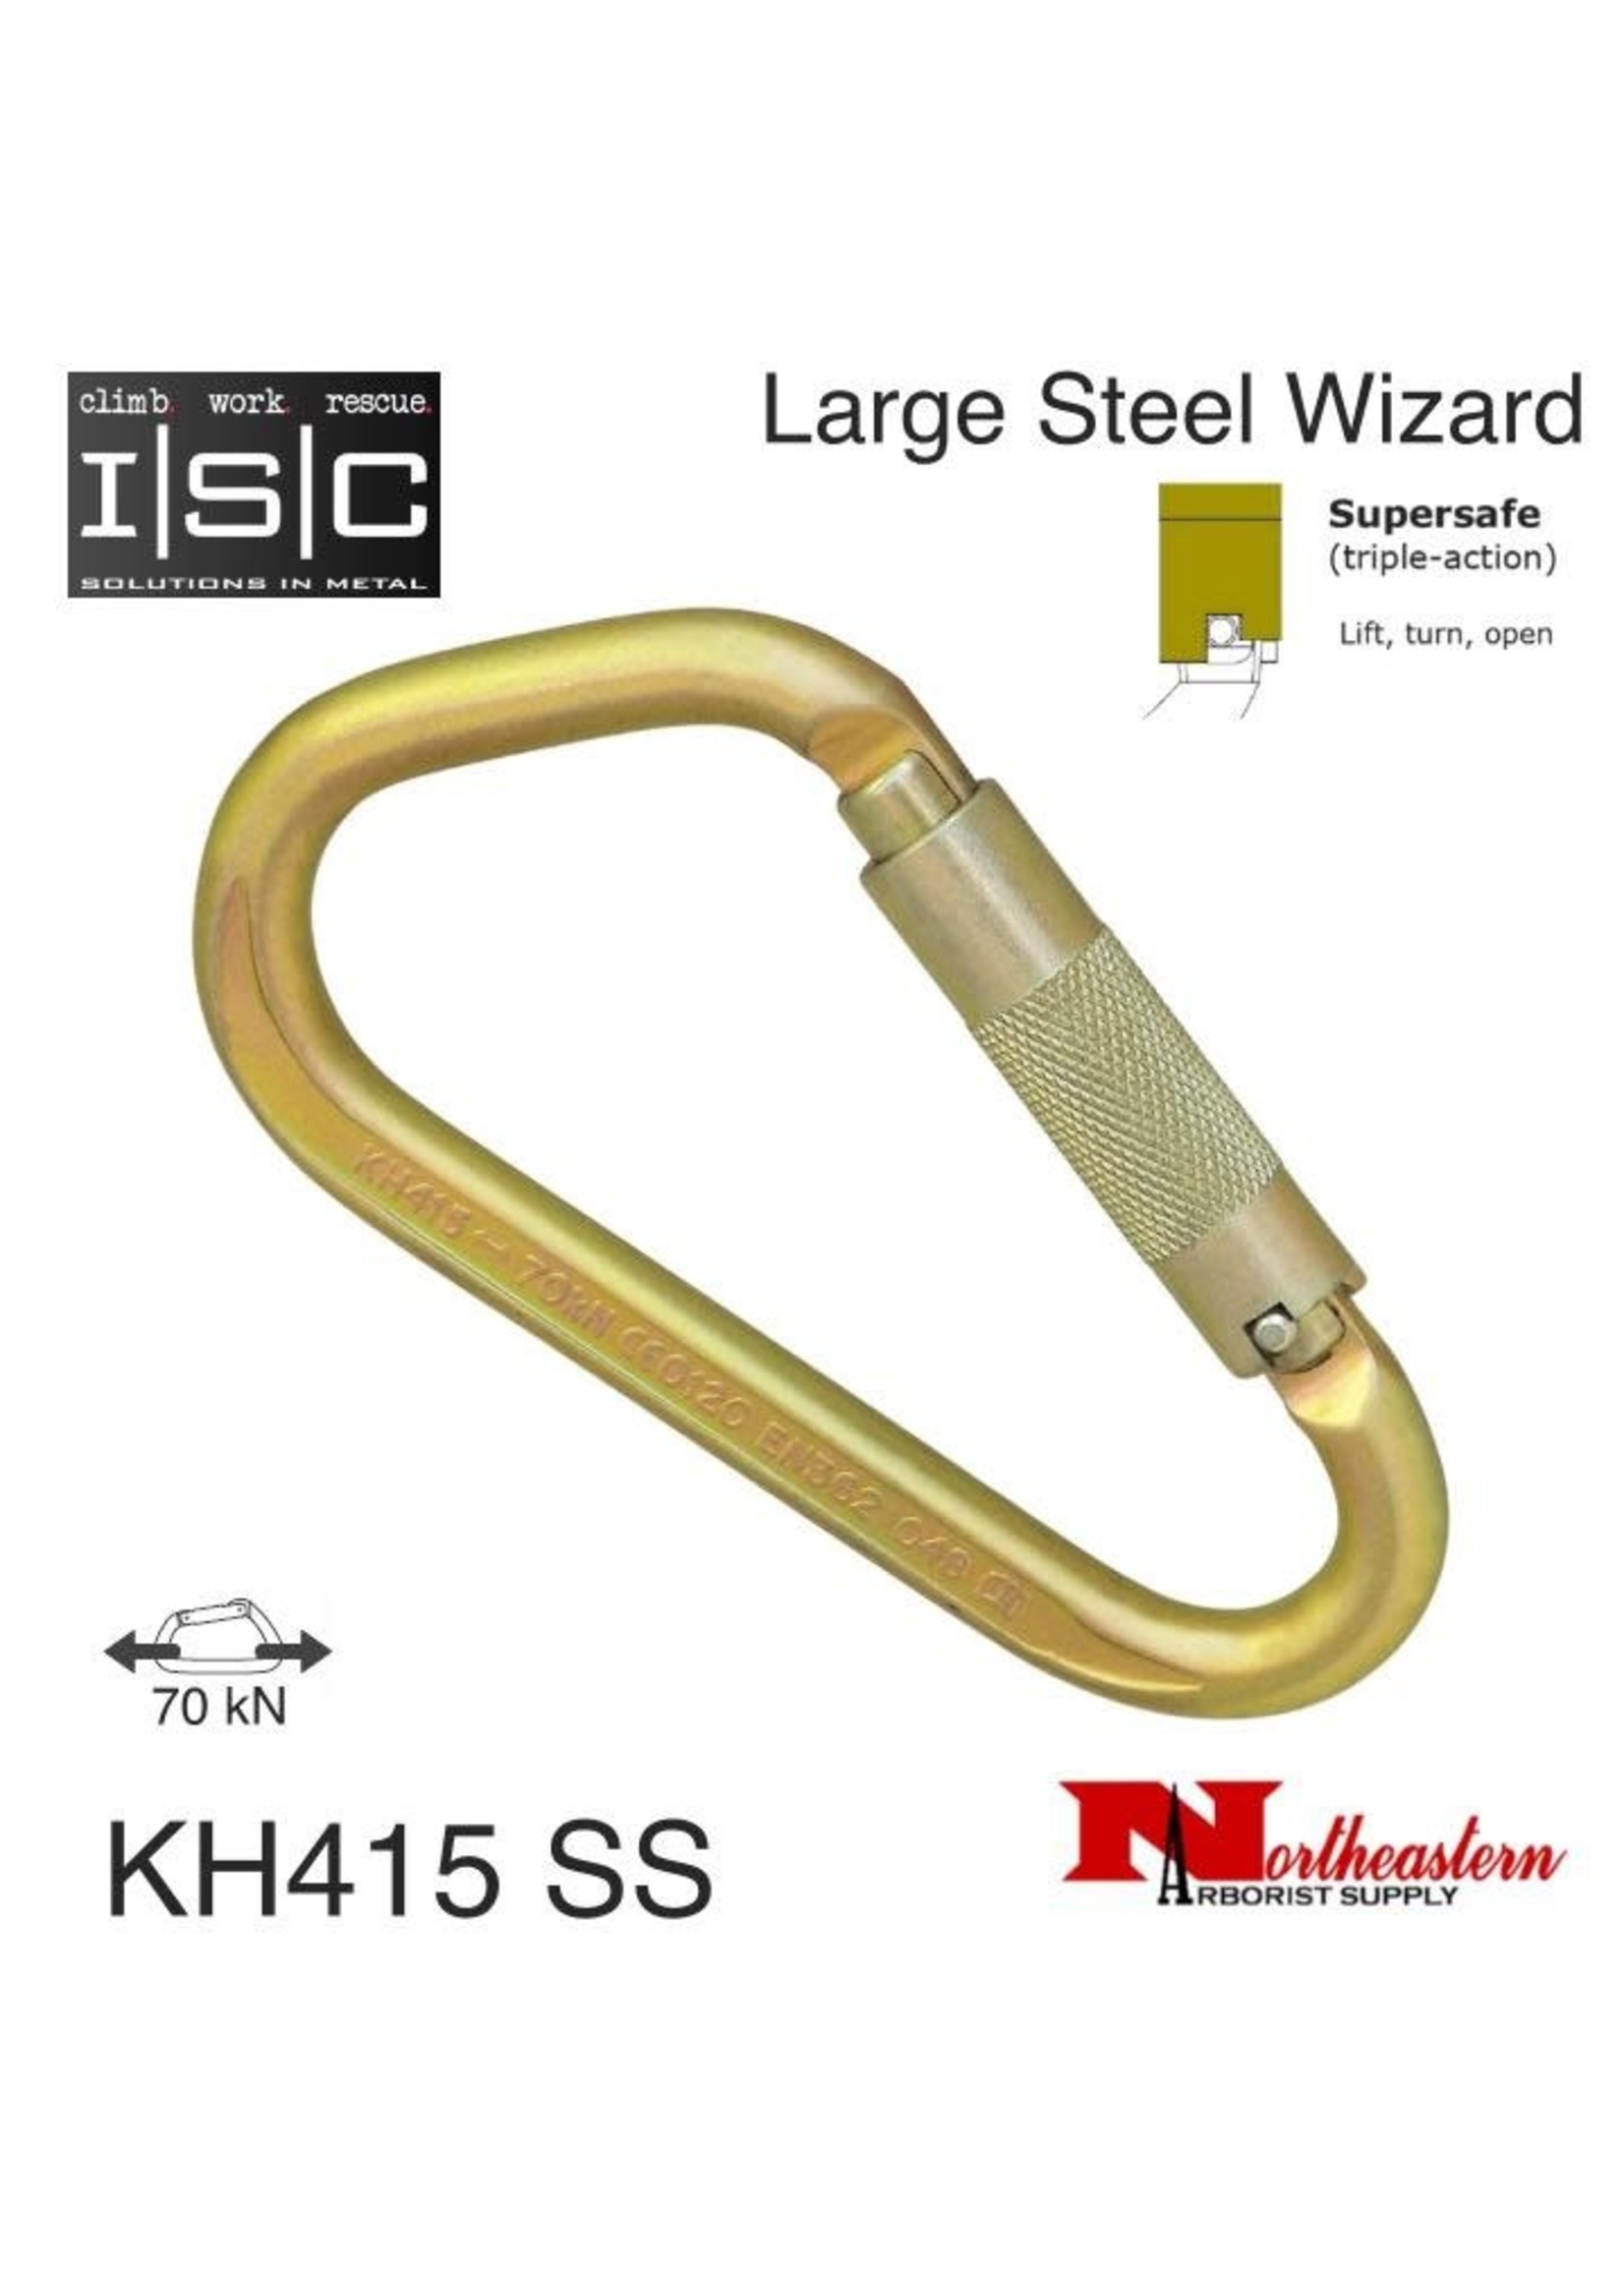 ISC Carabiner Large Iron Wizard 70kN MBS Supersafe